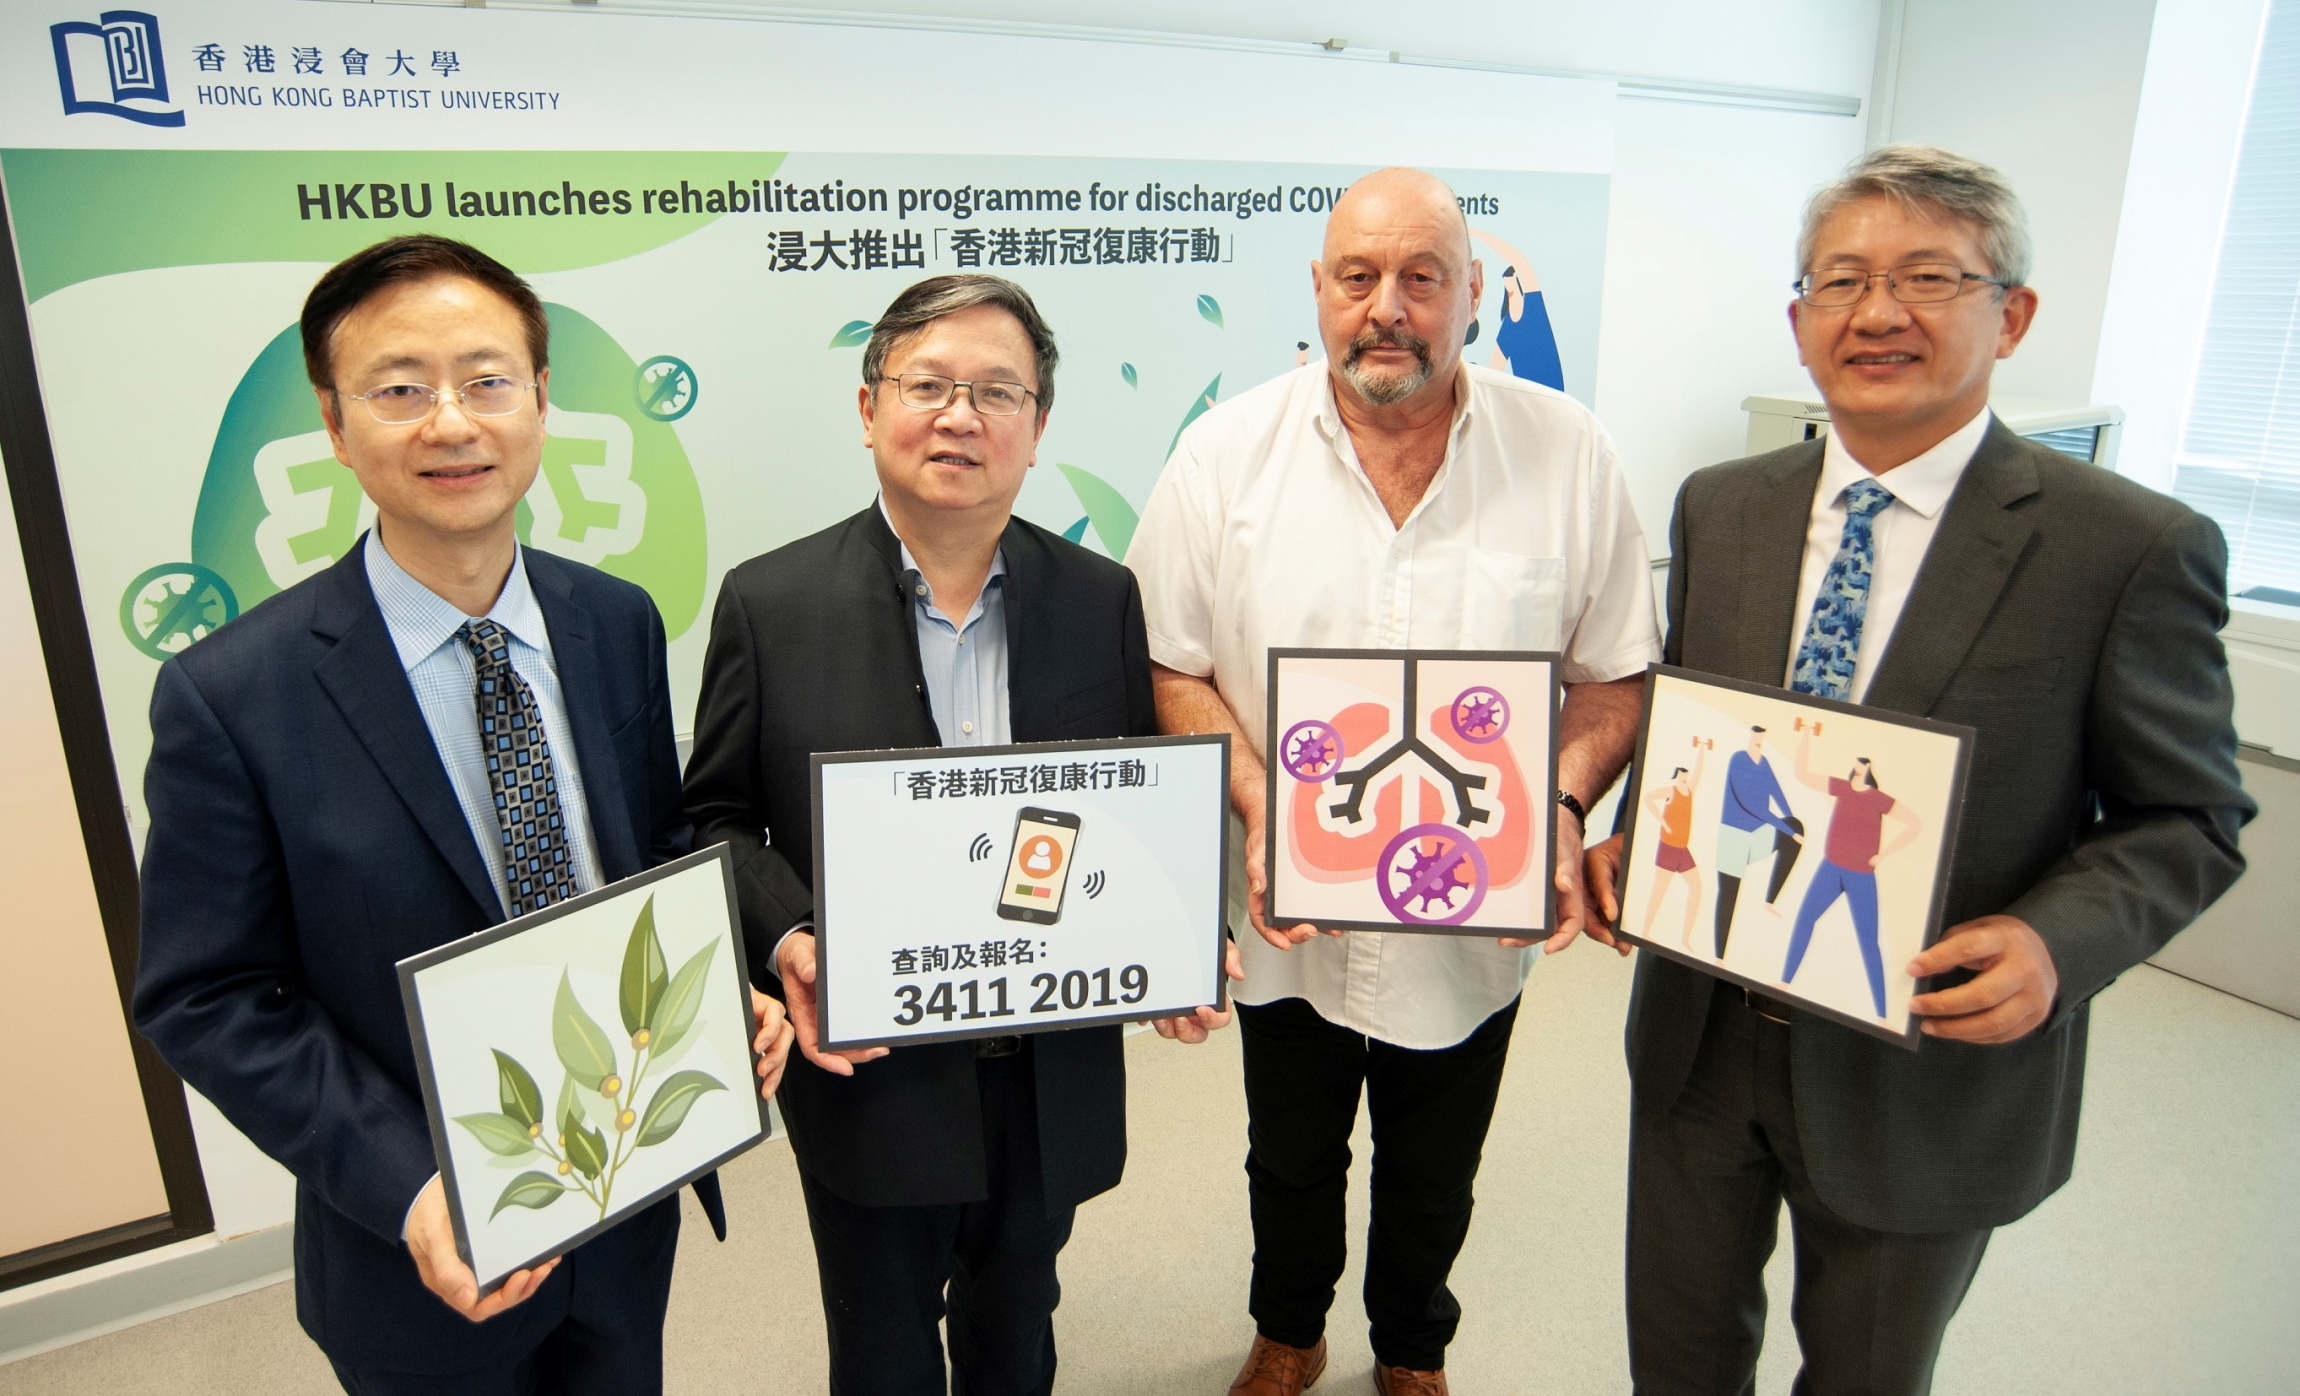 The Programme team is led by HKBU's eminent scientists and health professionals